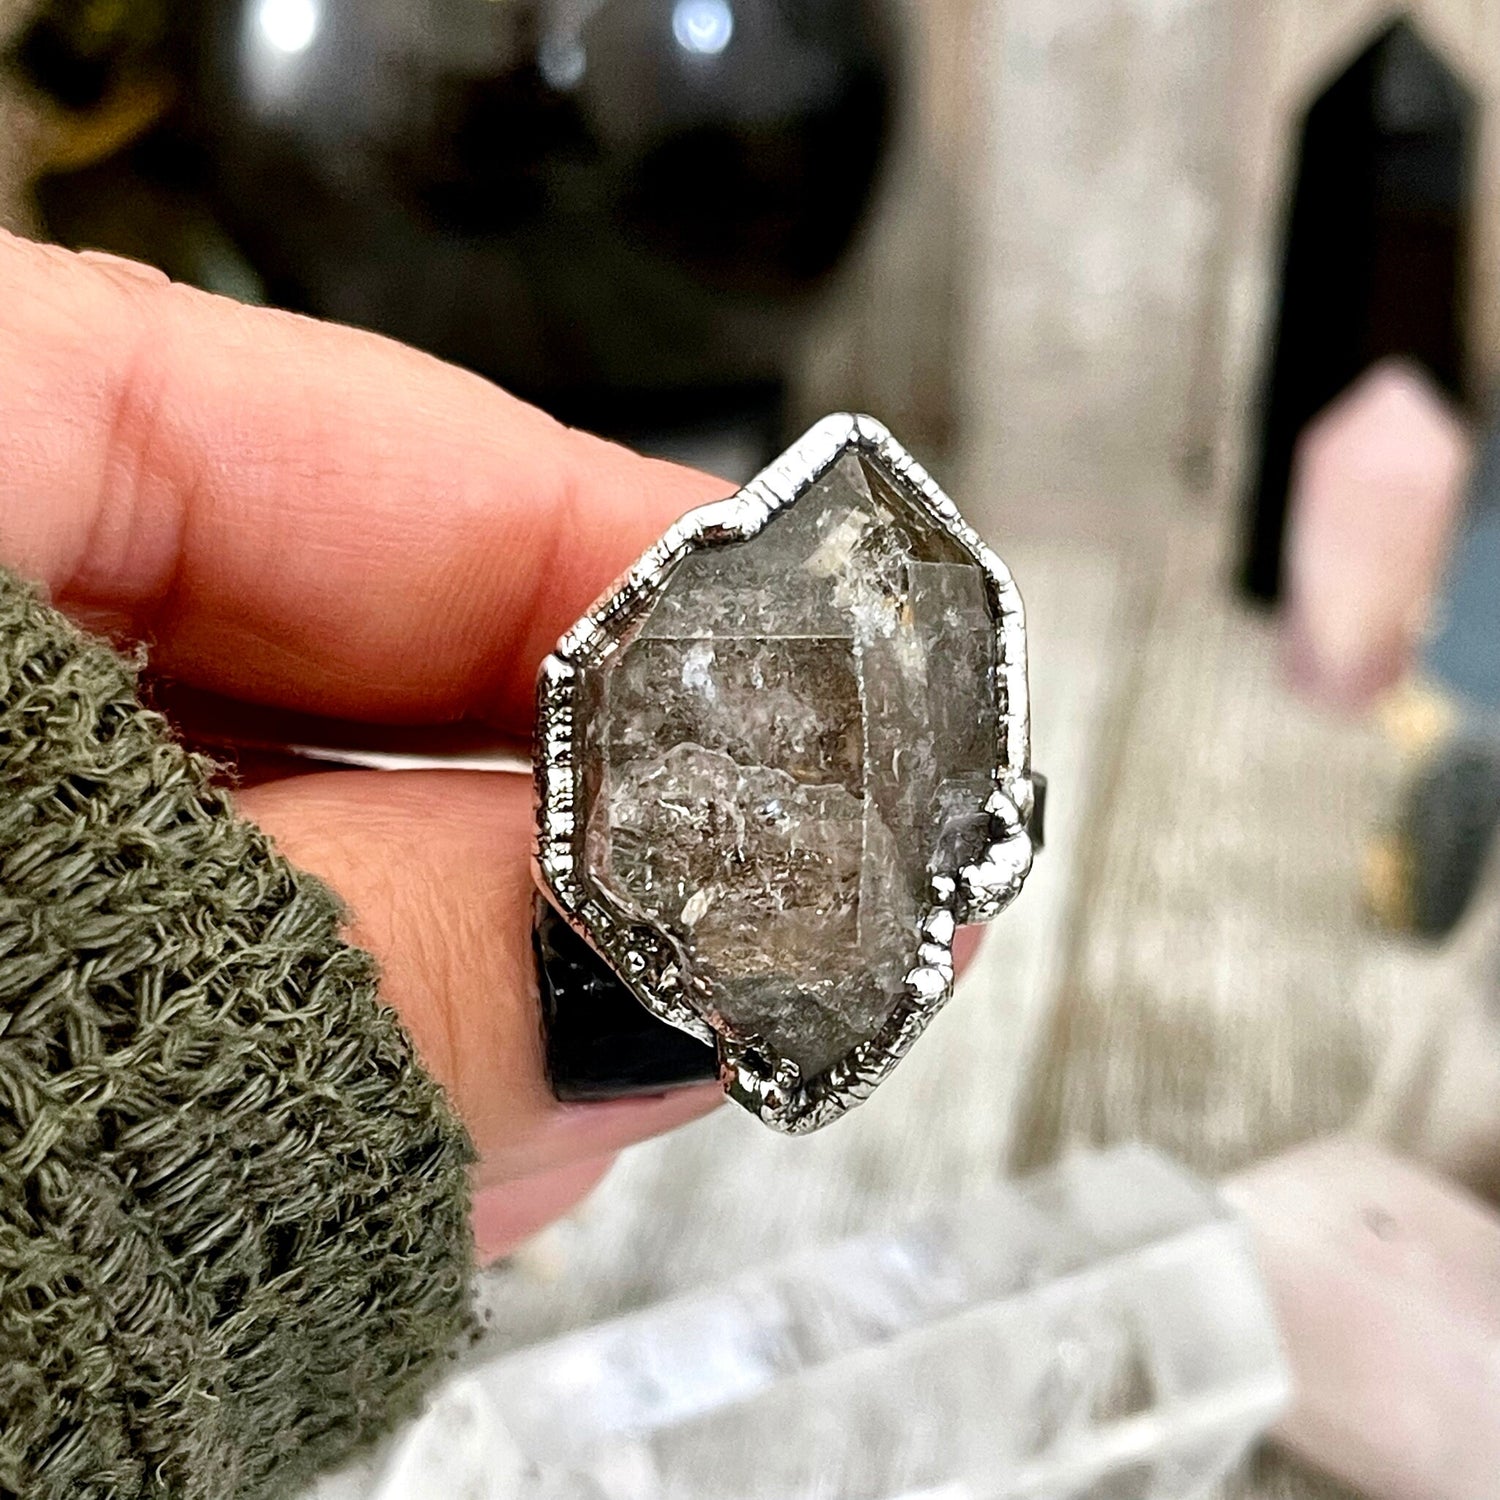 Size 7 Raw Herkimer Diamond Clear Quartz Crystal Cluster Ring Set in Fine Silver / Foxlark Collection - One of a Kind